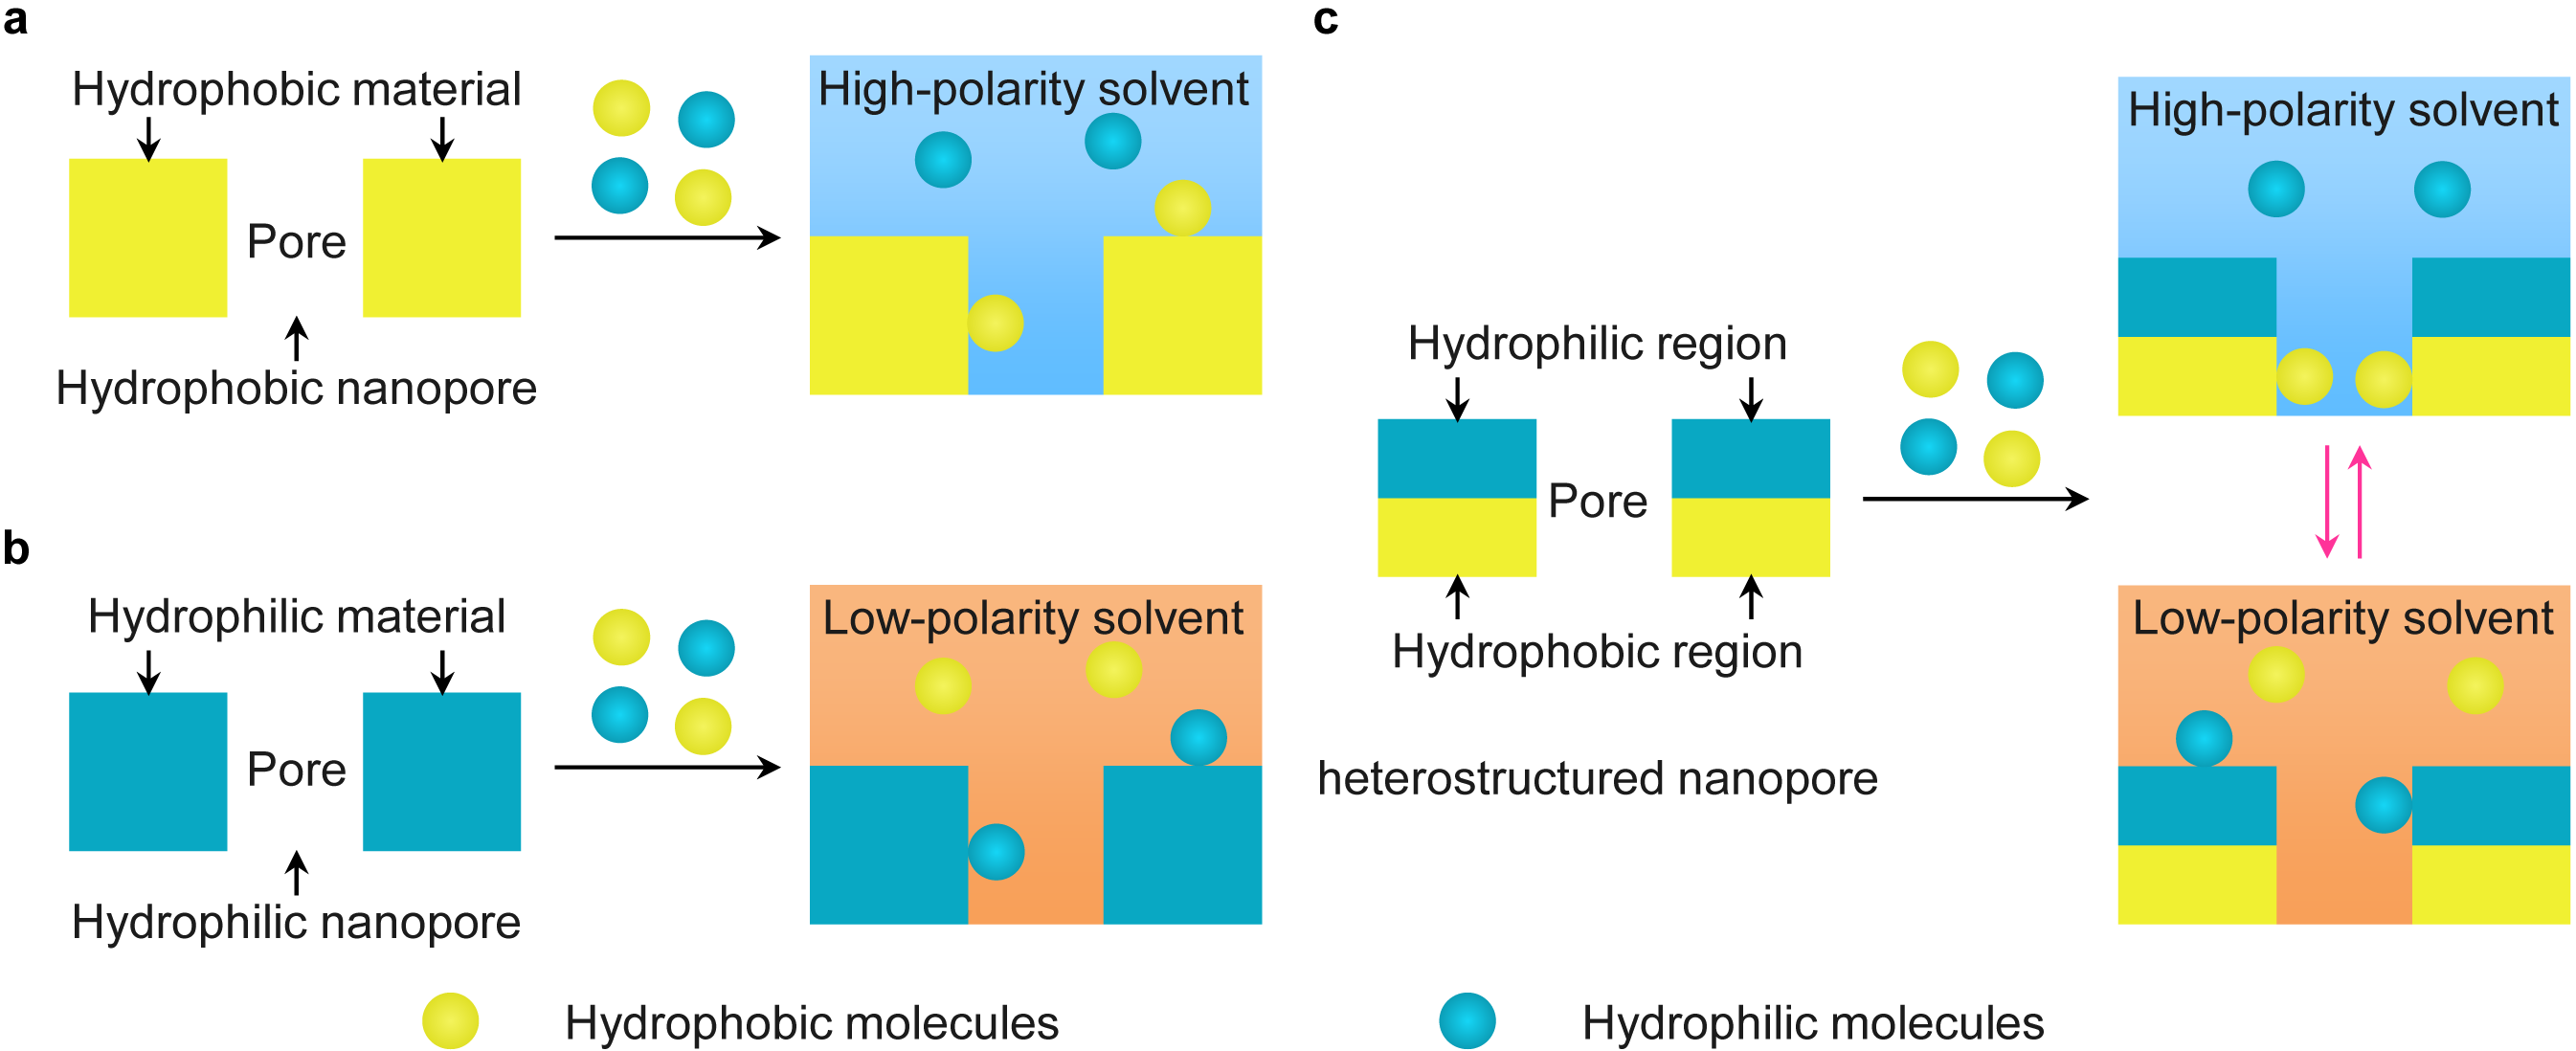 Solvent-switched biomolecule adsorption by the particles with heterostructured nanopores